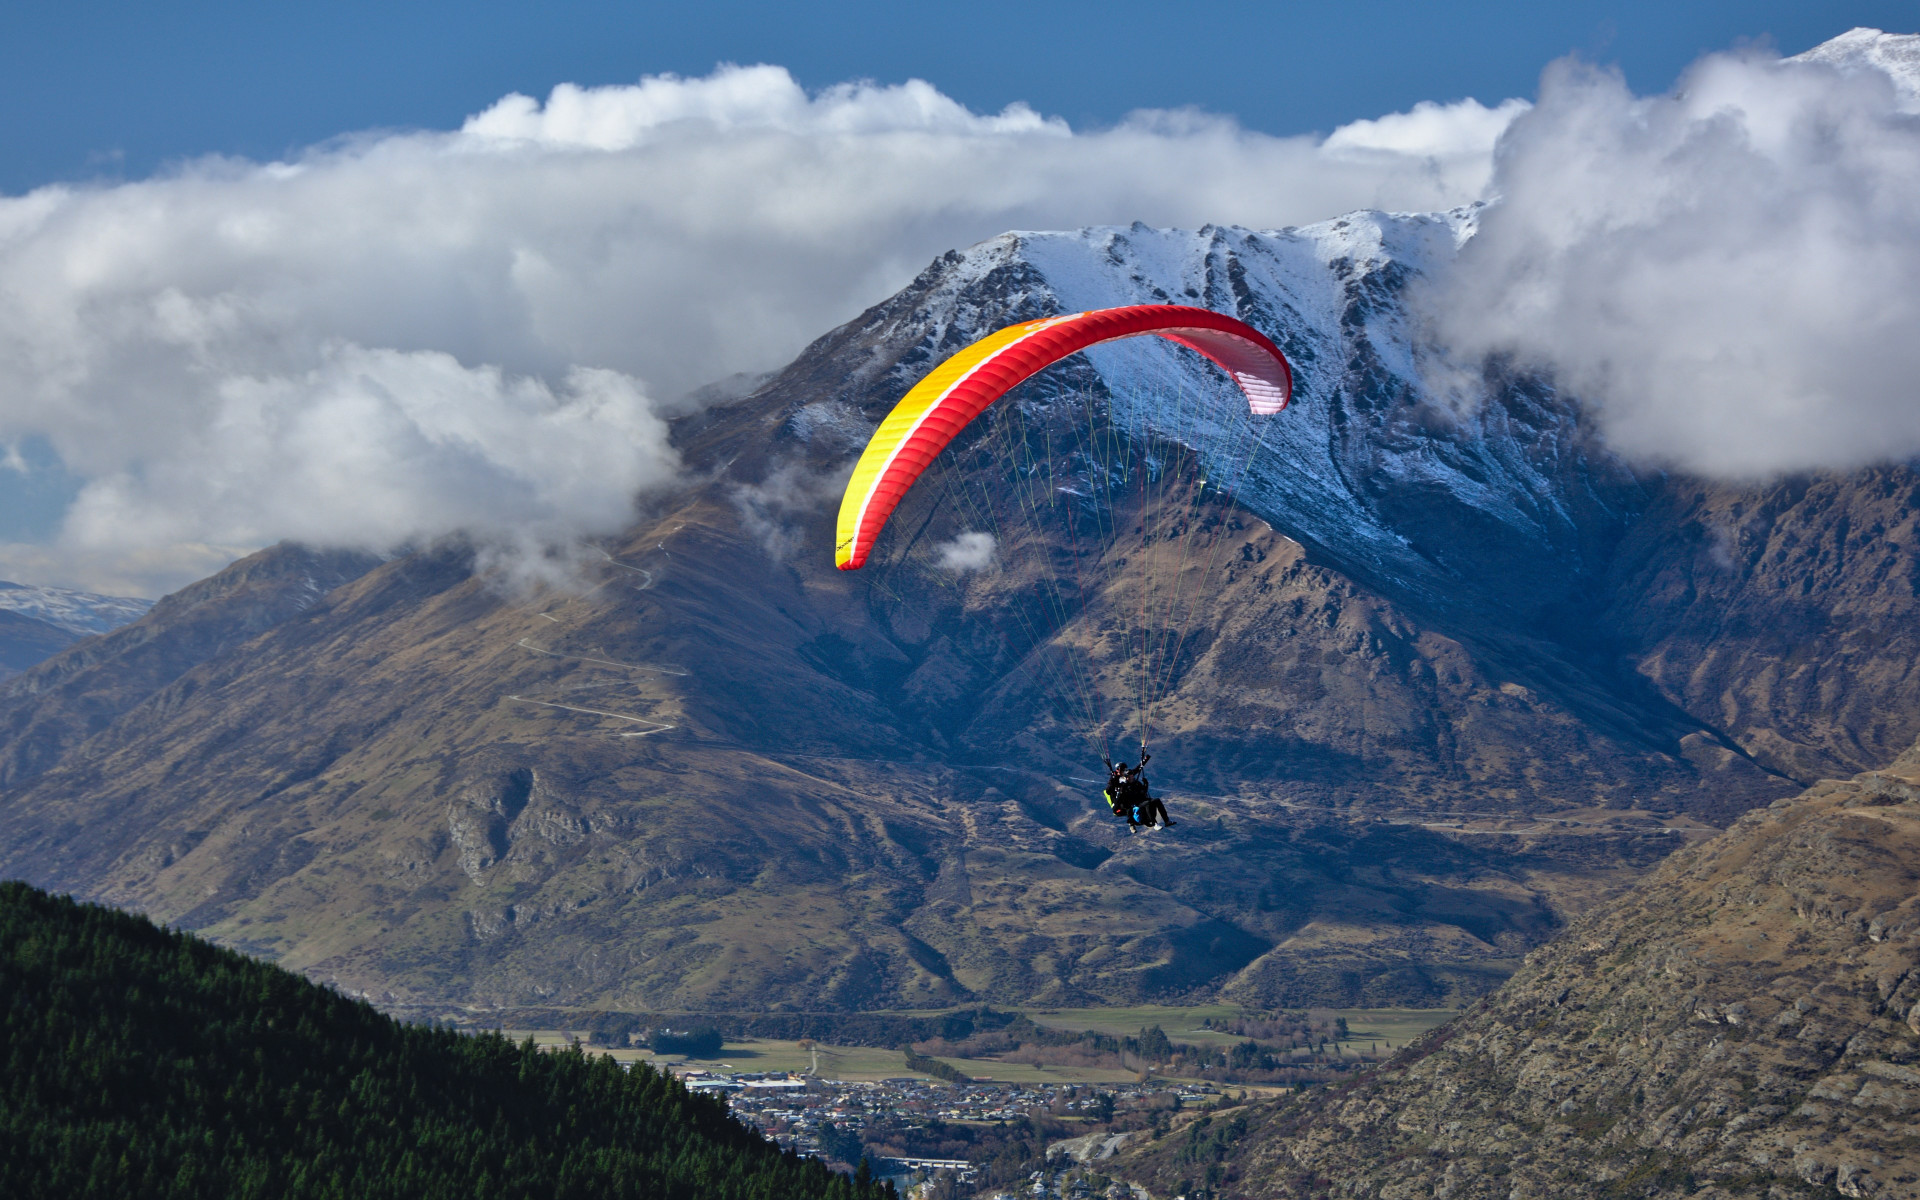 Paraglider up in the sky wallpaper 1920x1200